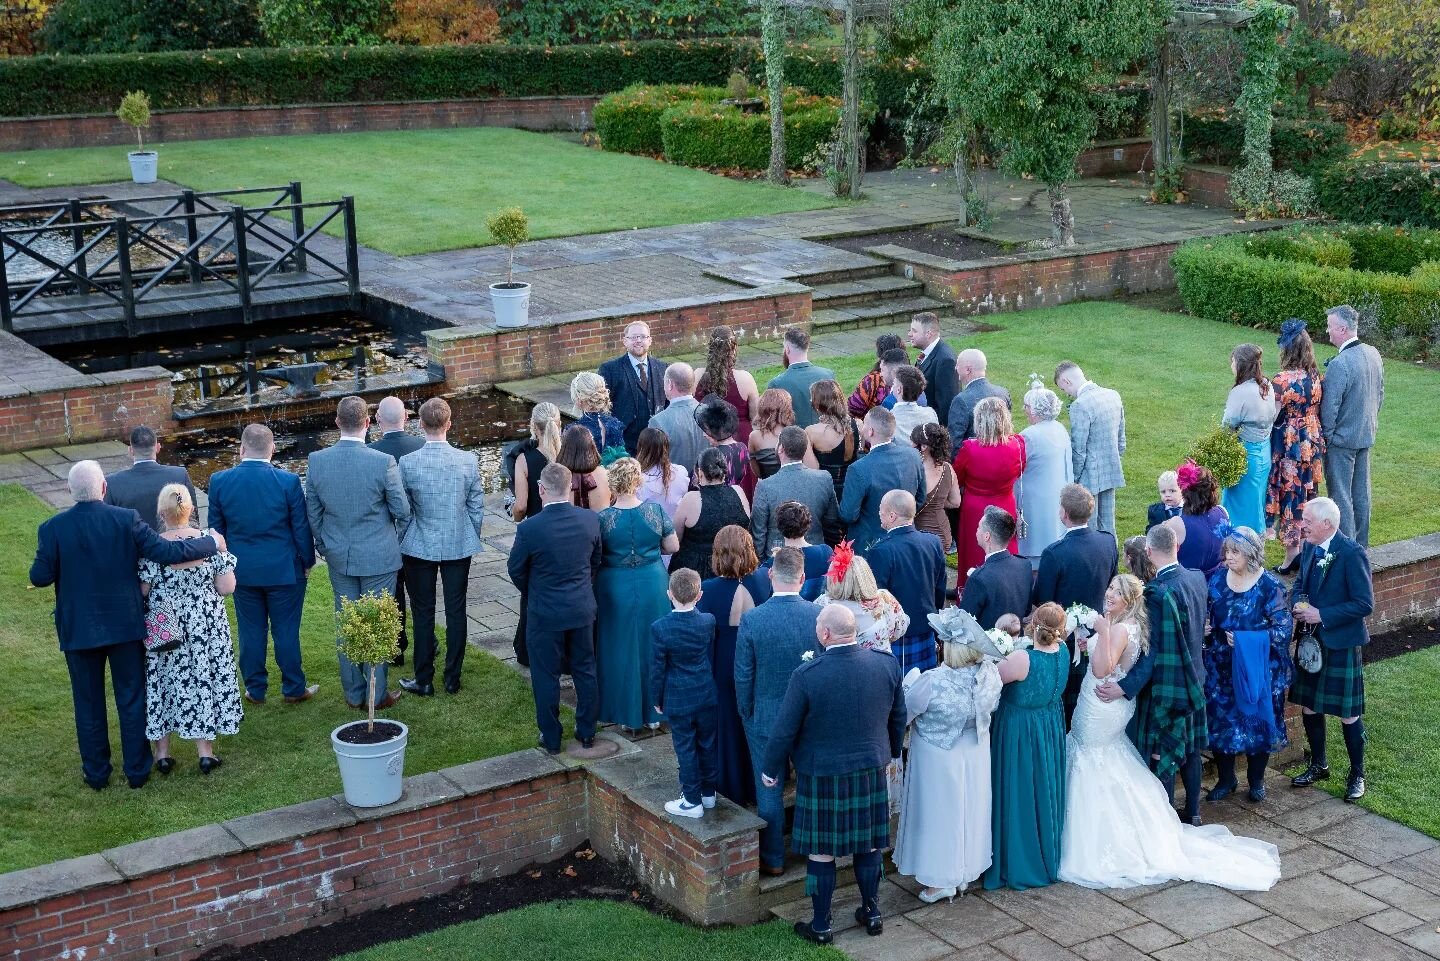 When you set up everyone for the big group photo and tell them not to move. 

When you get up top to take the photo and everyone has moved lol. 

#thomasmccabephotography
#myscotlandwedding
#scottishwedding #ayrwedding #westernhousehotel #ayrshire #a